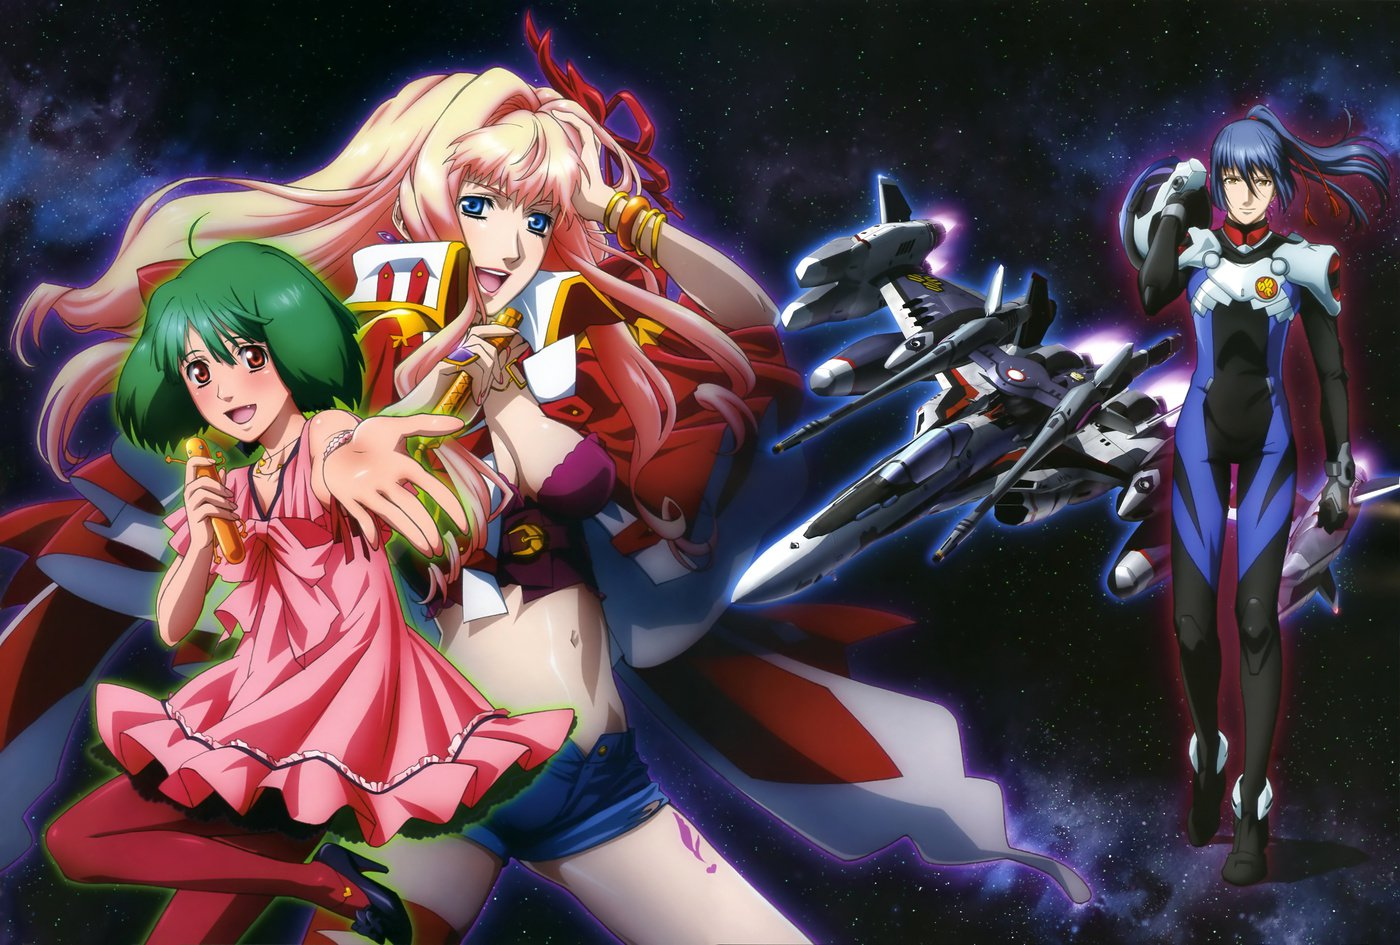 Macross Frontier - Keeping the Formula Fresh - Spoiler Free Anime Review  284 - YouTube